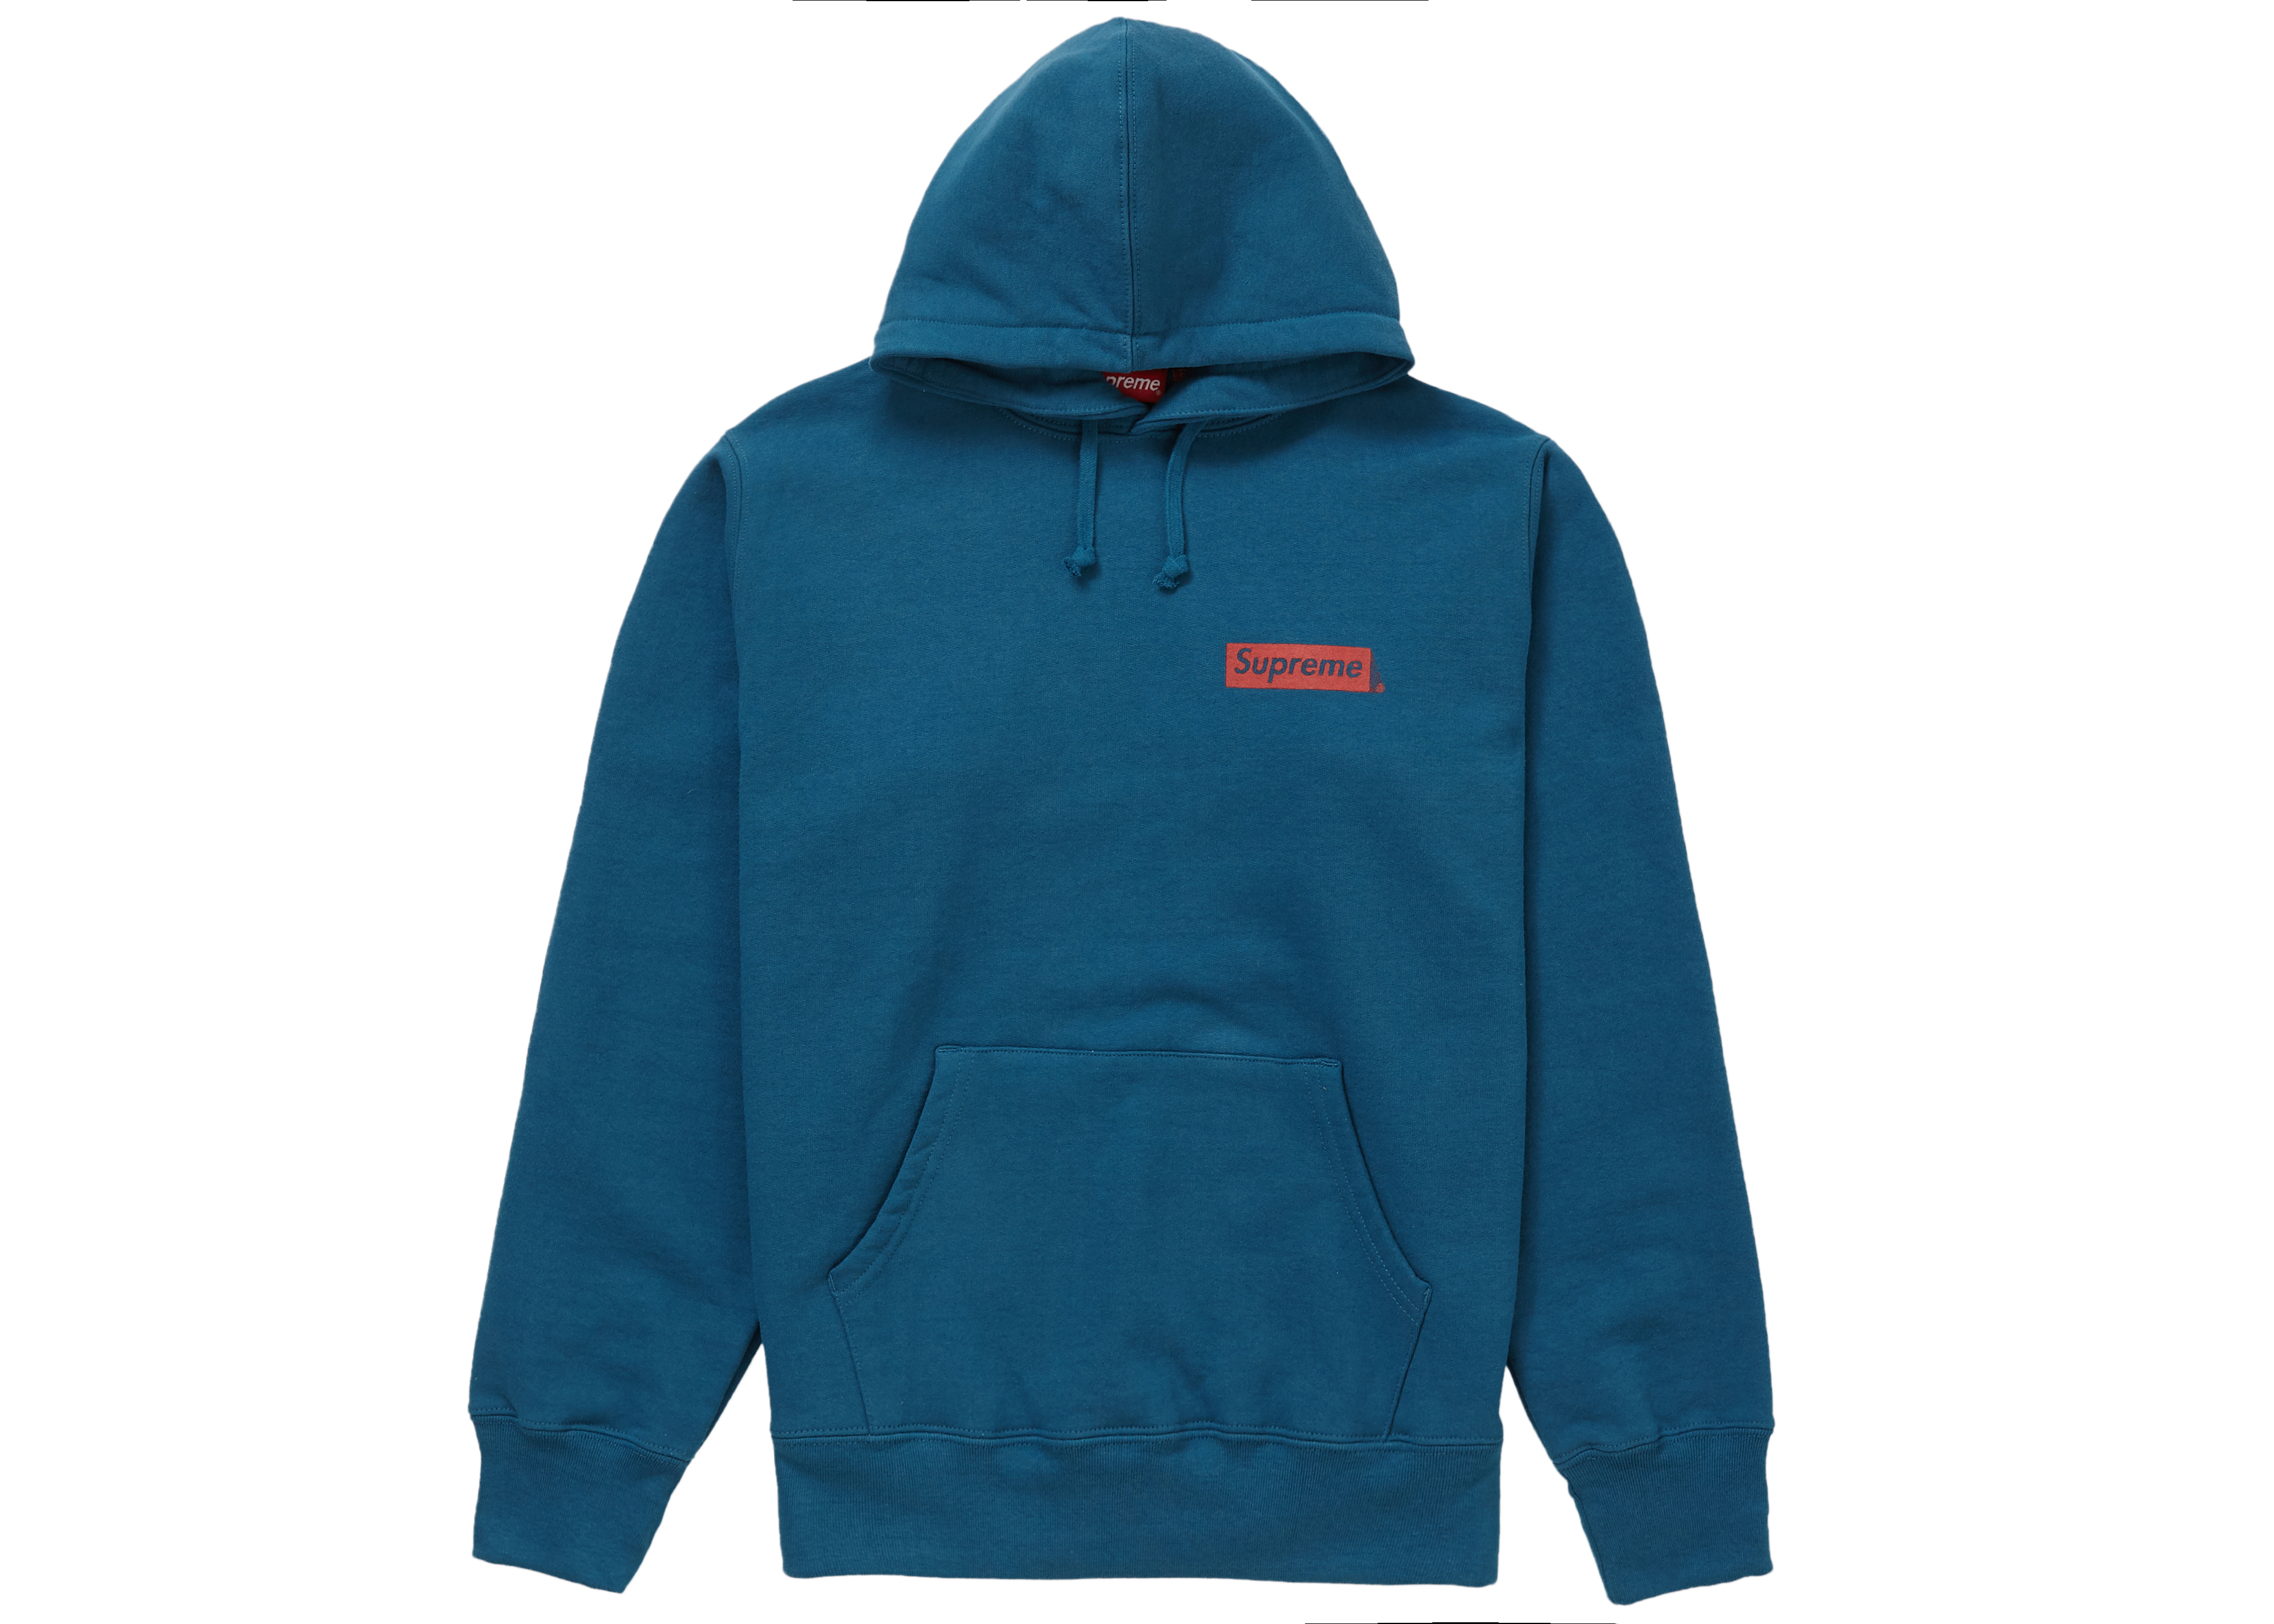 Supreme Hoodie Stop Crying Deals, 53% OFF | andreamotis.com